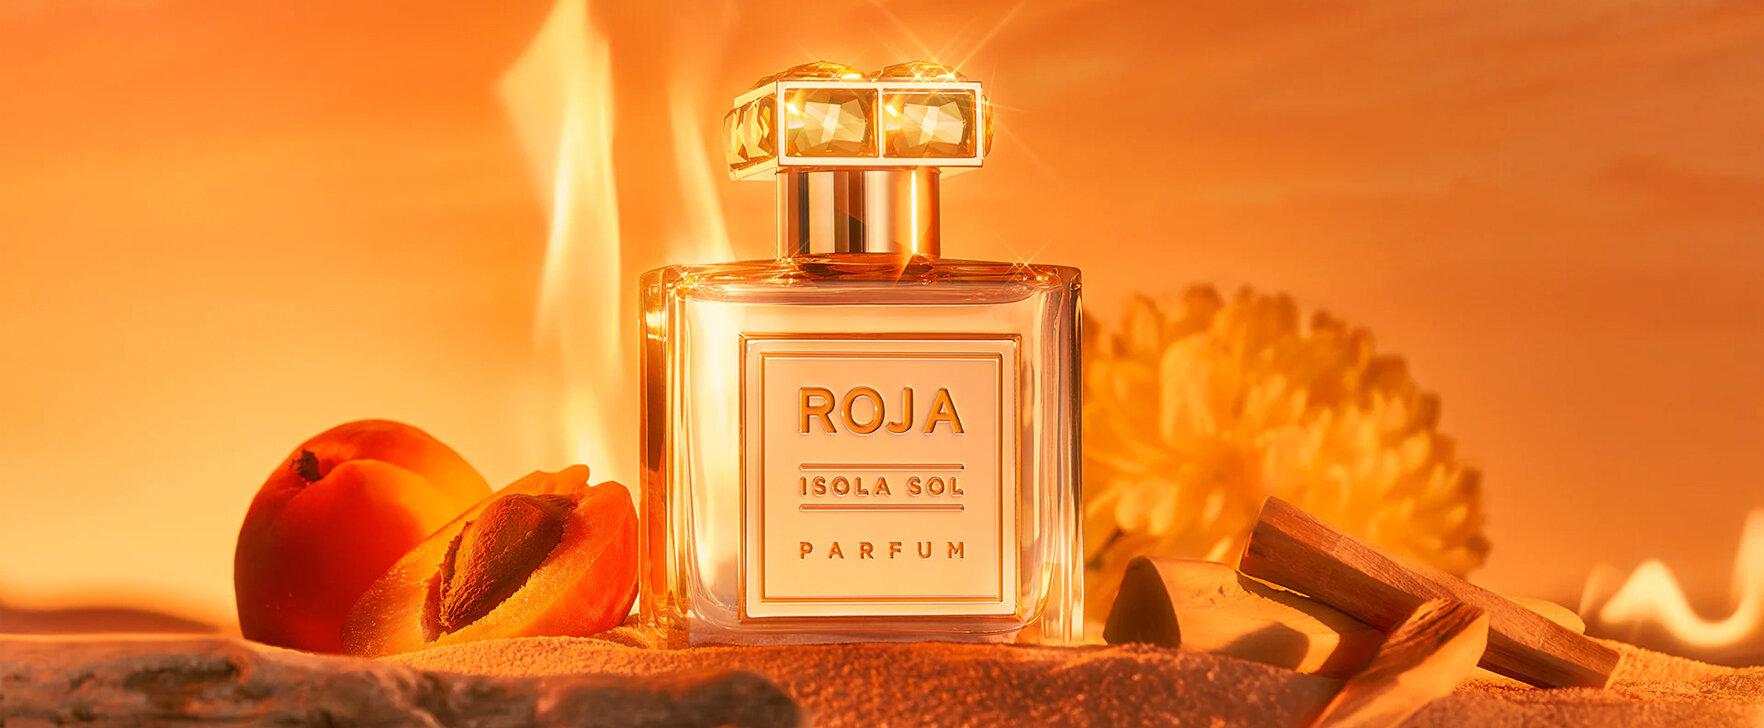 An Tribute to the Island Sun: Isola Sol by Roja Parfums